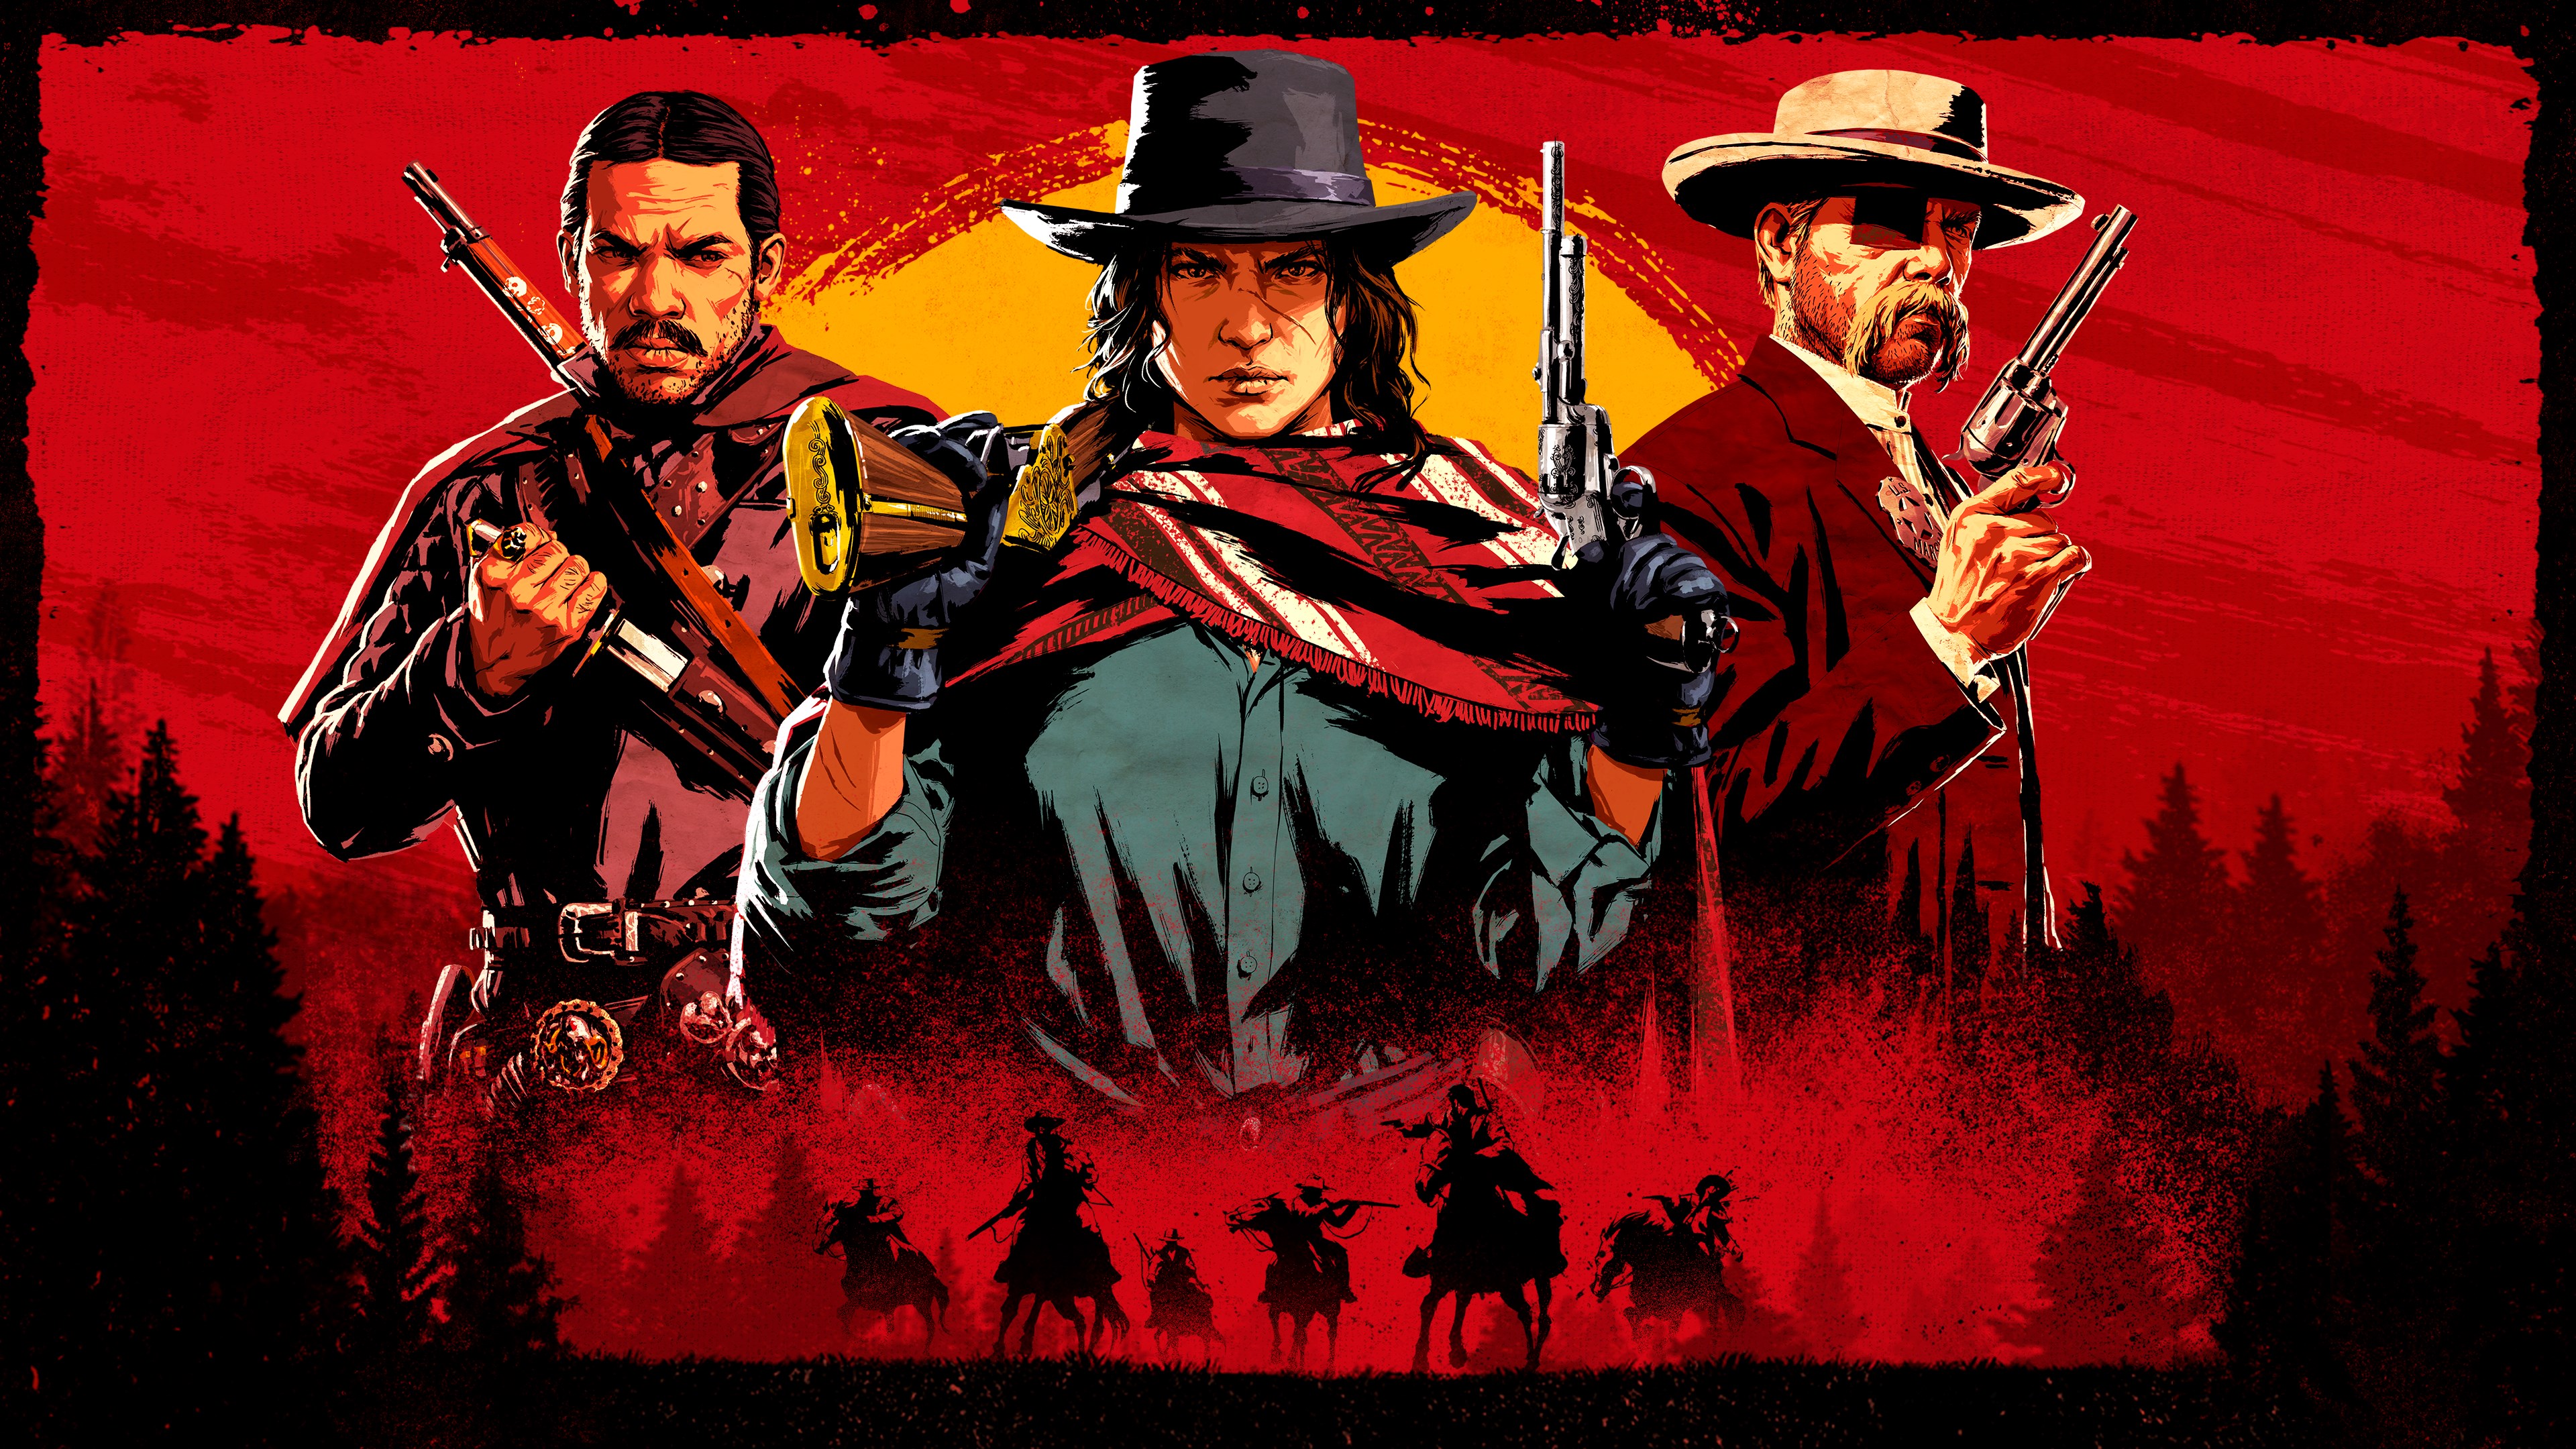 red dead redemption xbox marketplace